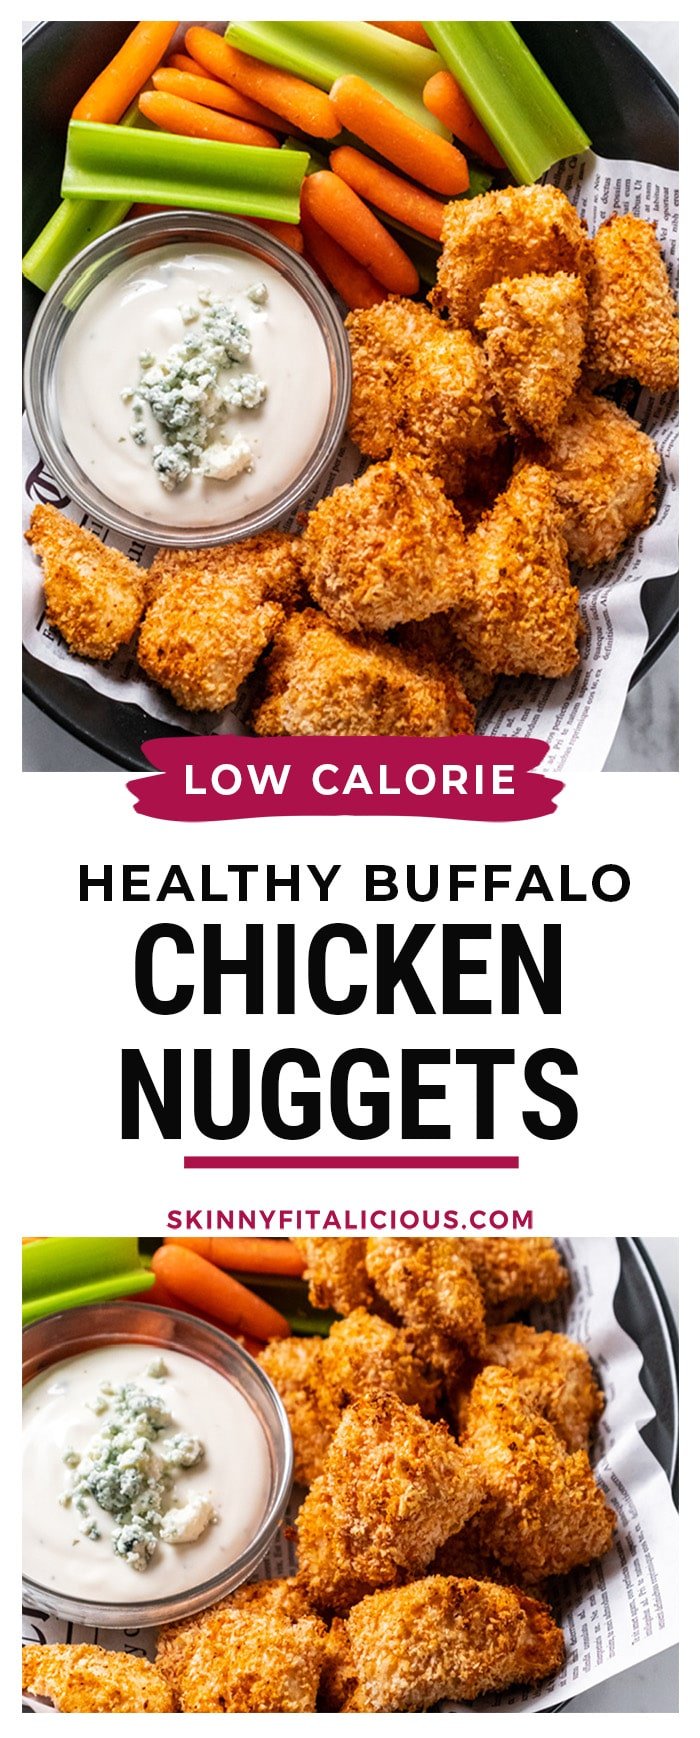 Healthy Air Fryer Buffalo Chicken Nuggets are baked not fried. Just as delicious as regular chicken nuggets but without the calories and with tasty buffalo sauce flavor!